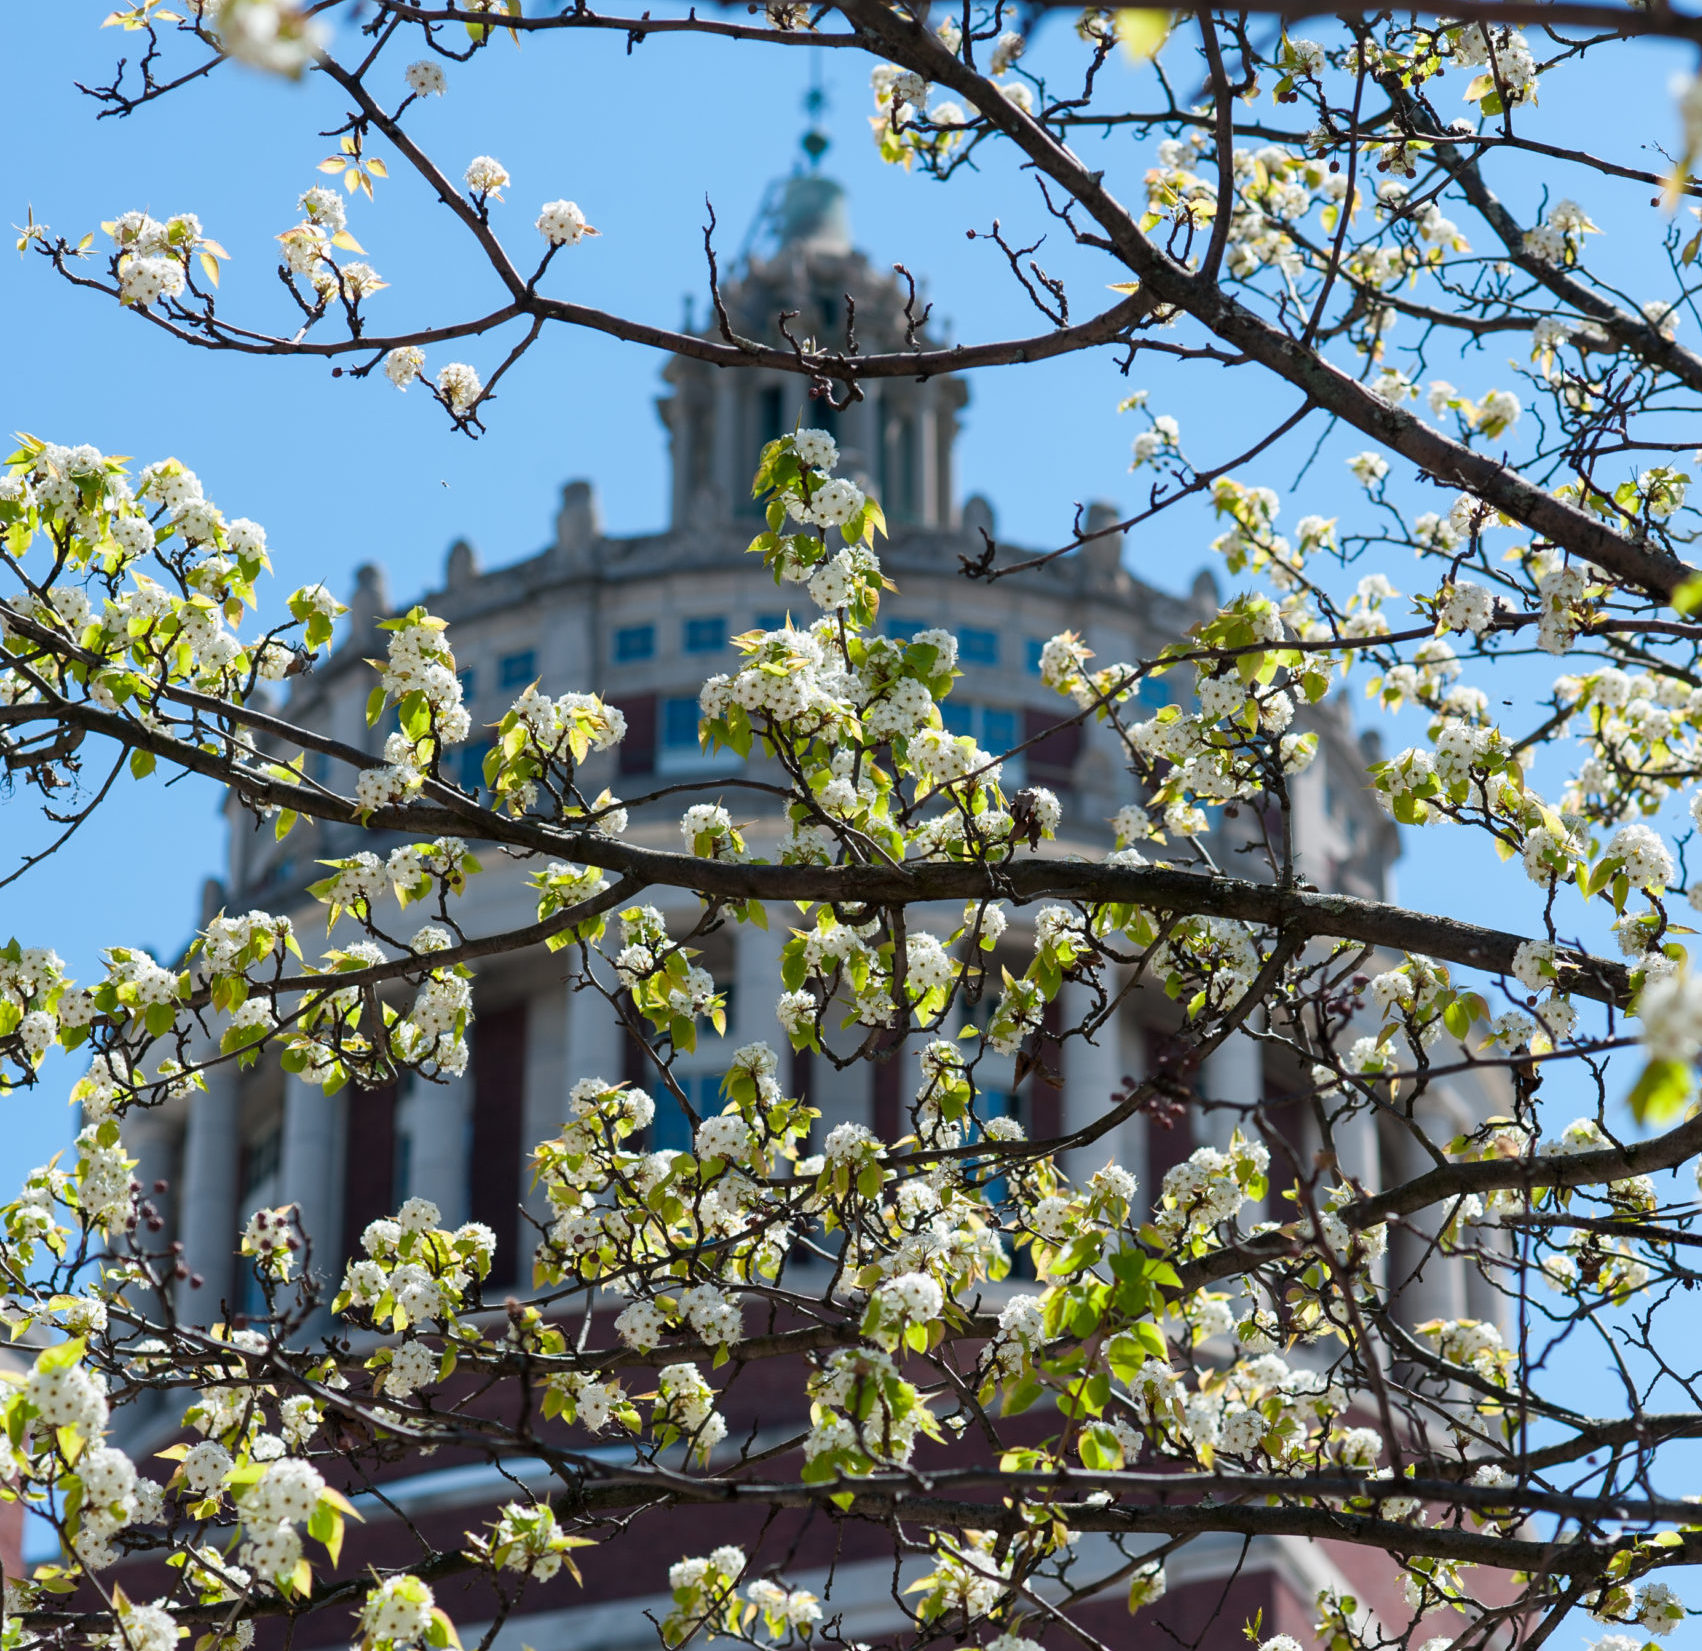 Rush Rhees Library through flowering trees at University of Rochester River Campus